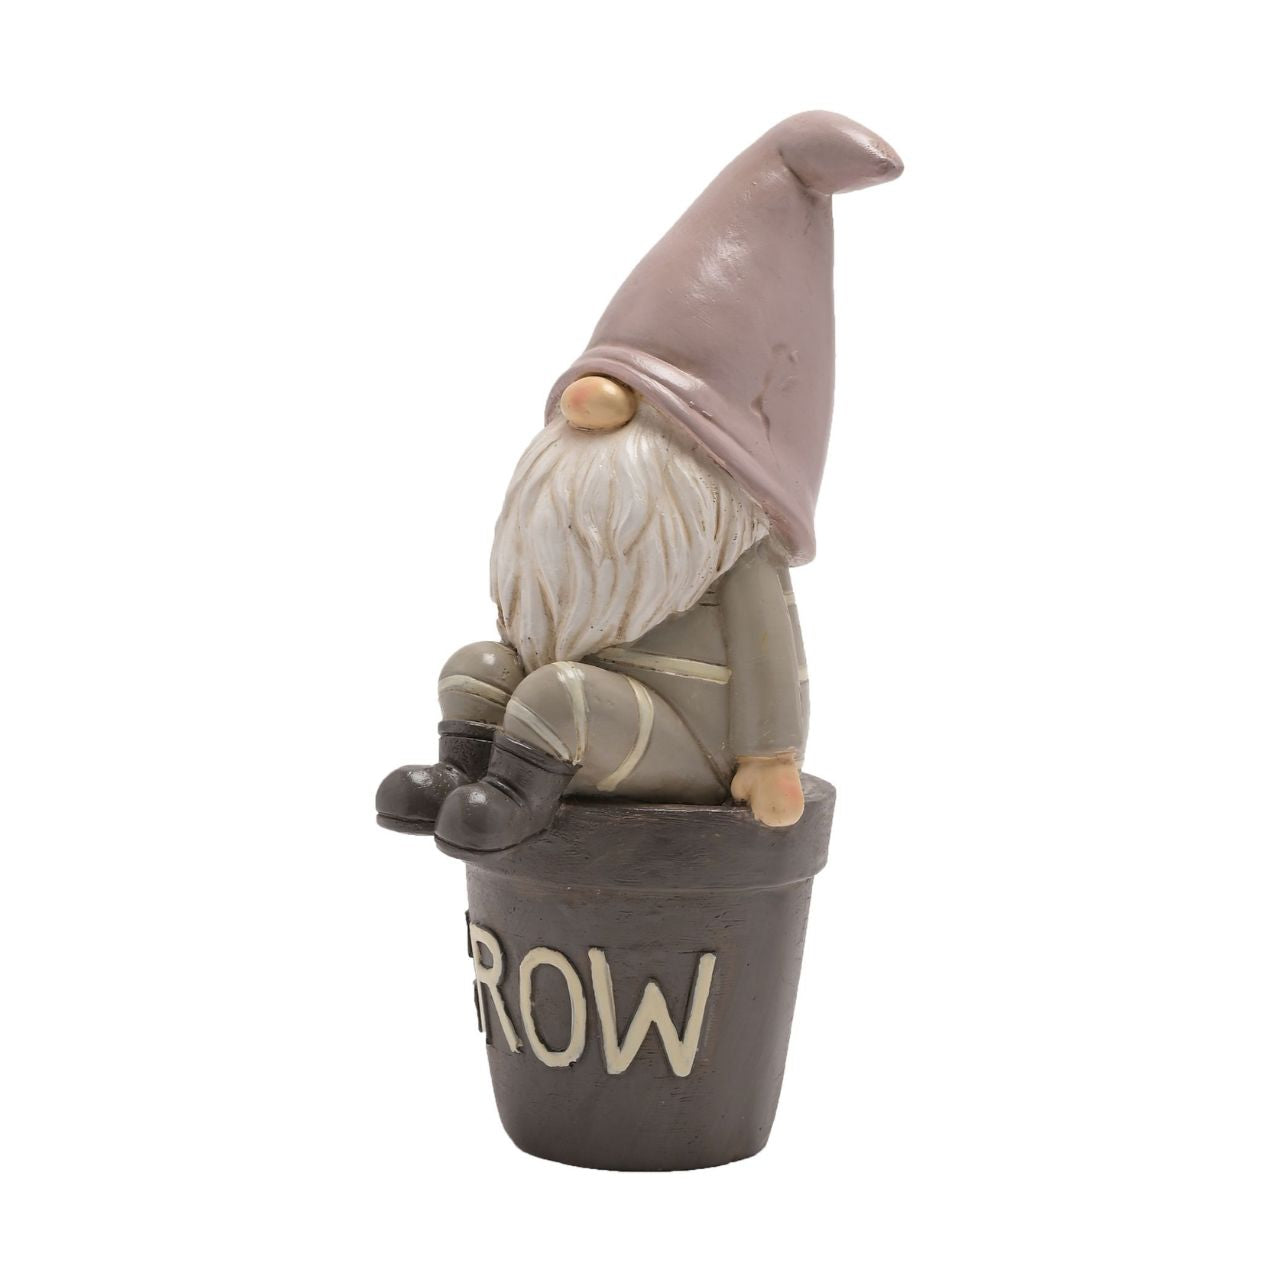 This fun-filled decoration will raise smiles and add character to gardens.  The hand painted resin garden decoration depicts a loveable gonk sitting upon a flowerpot that displays the word ‘Grow’ across the front. It showcases beautiful colouring throughout and offers versatile display options around the garden.